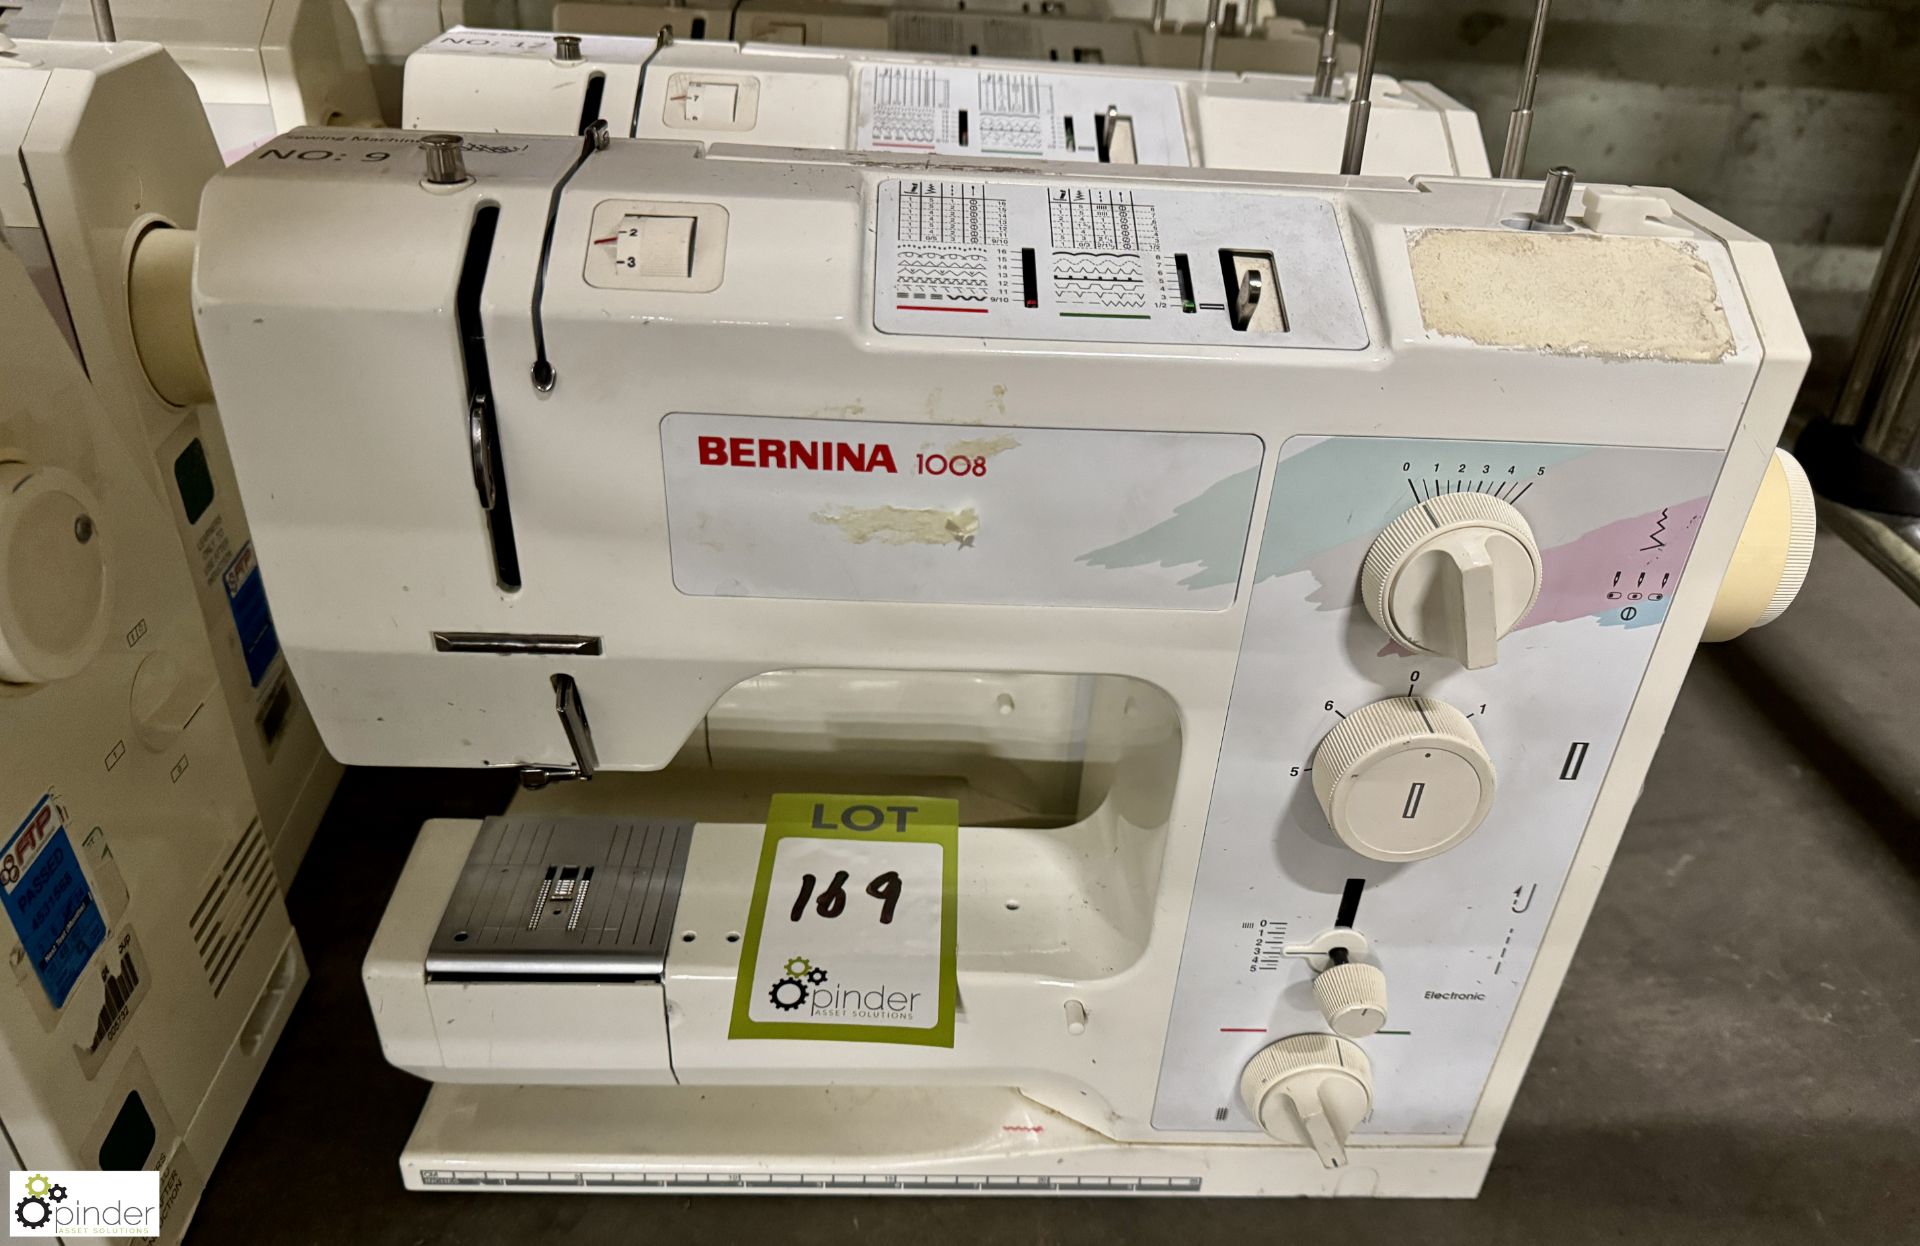 4 Bermina 1008 Domestic Lockstitch Sewing Machines, 240volts (no power leads or foot controls) - Image 3 of 4